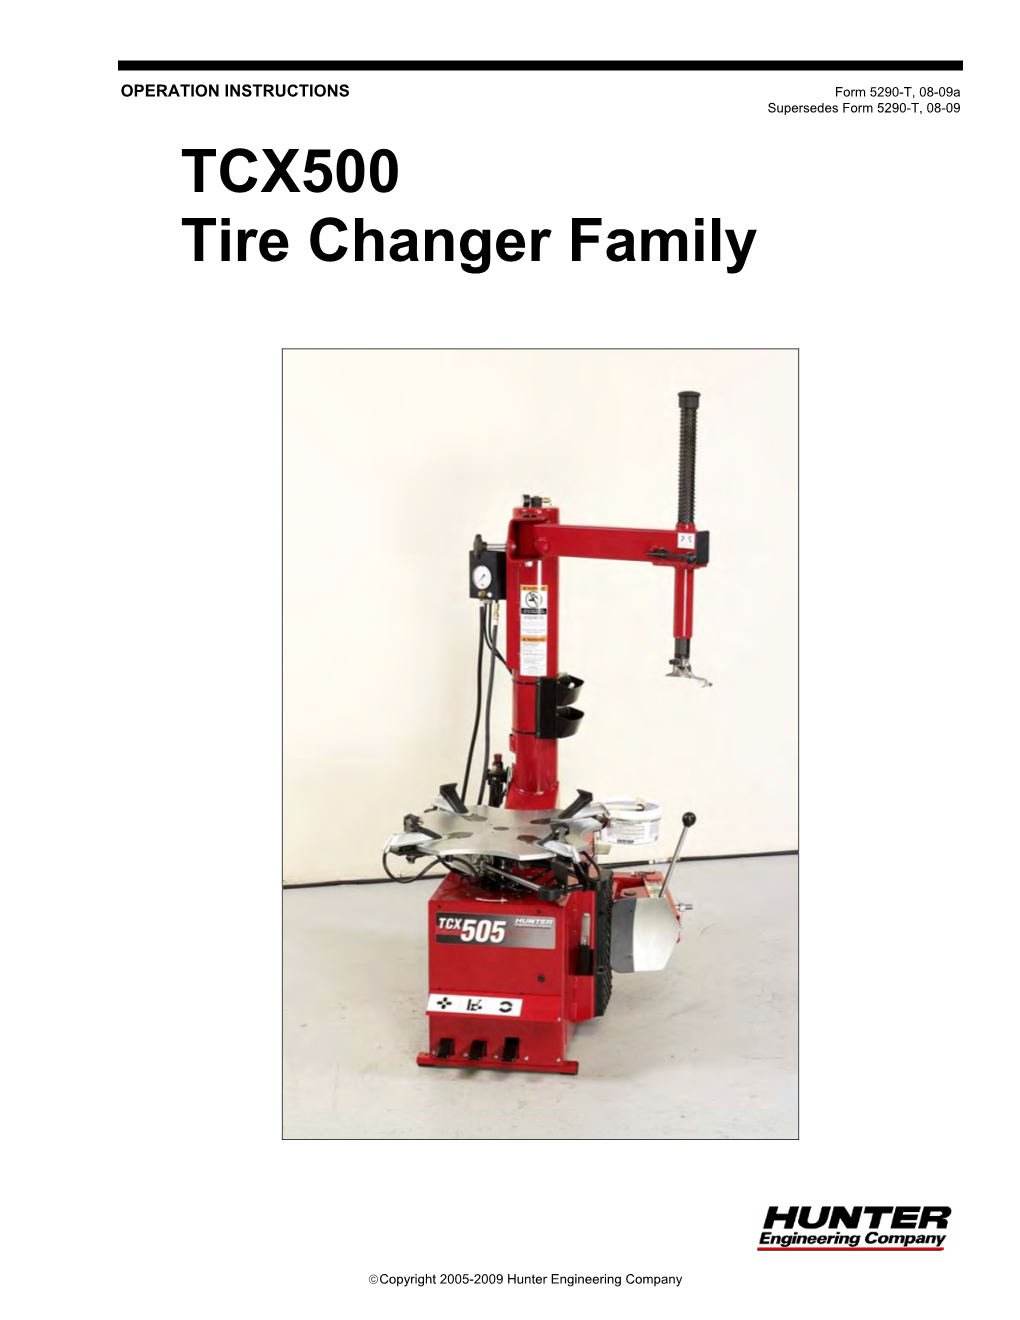 TCX500 Tire Changer Family Operation Manual, Form 5290-T